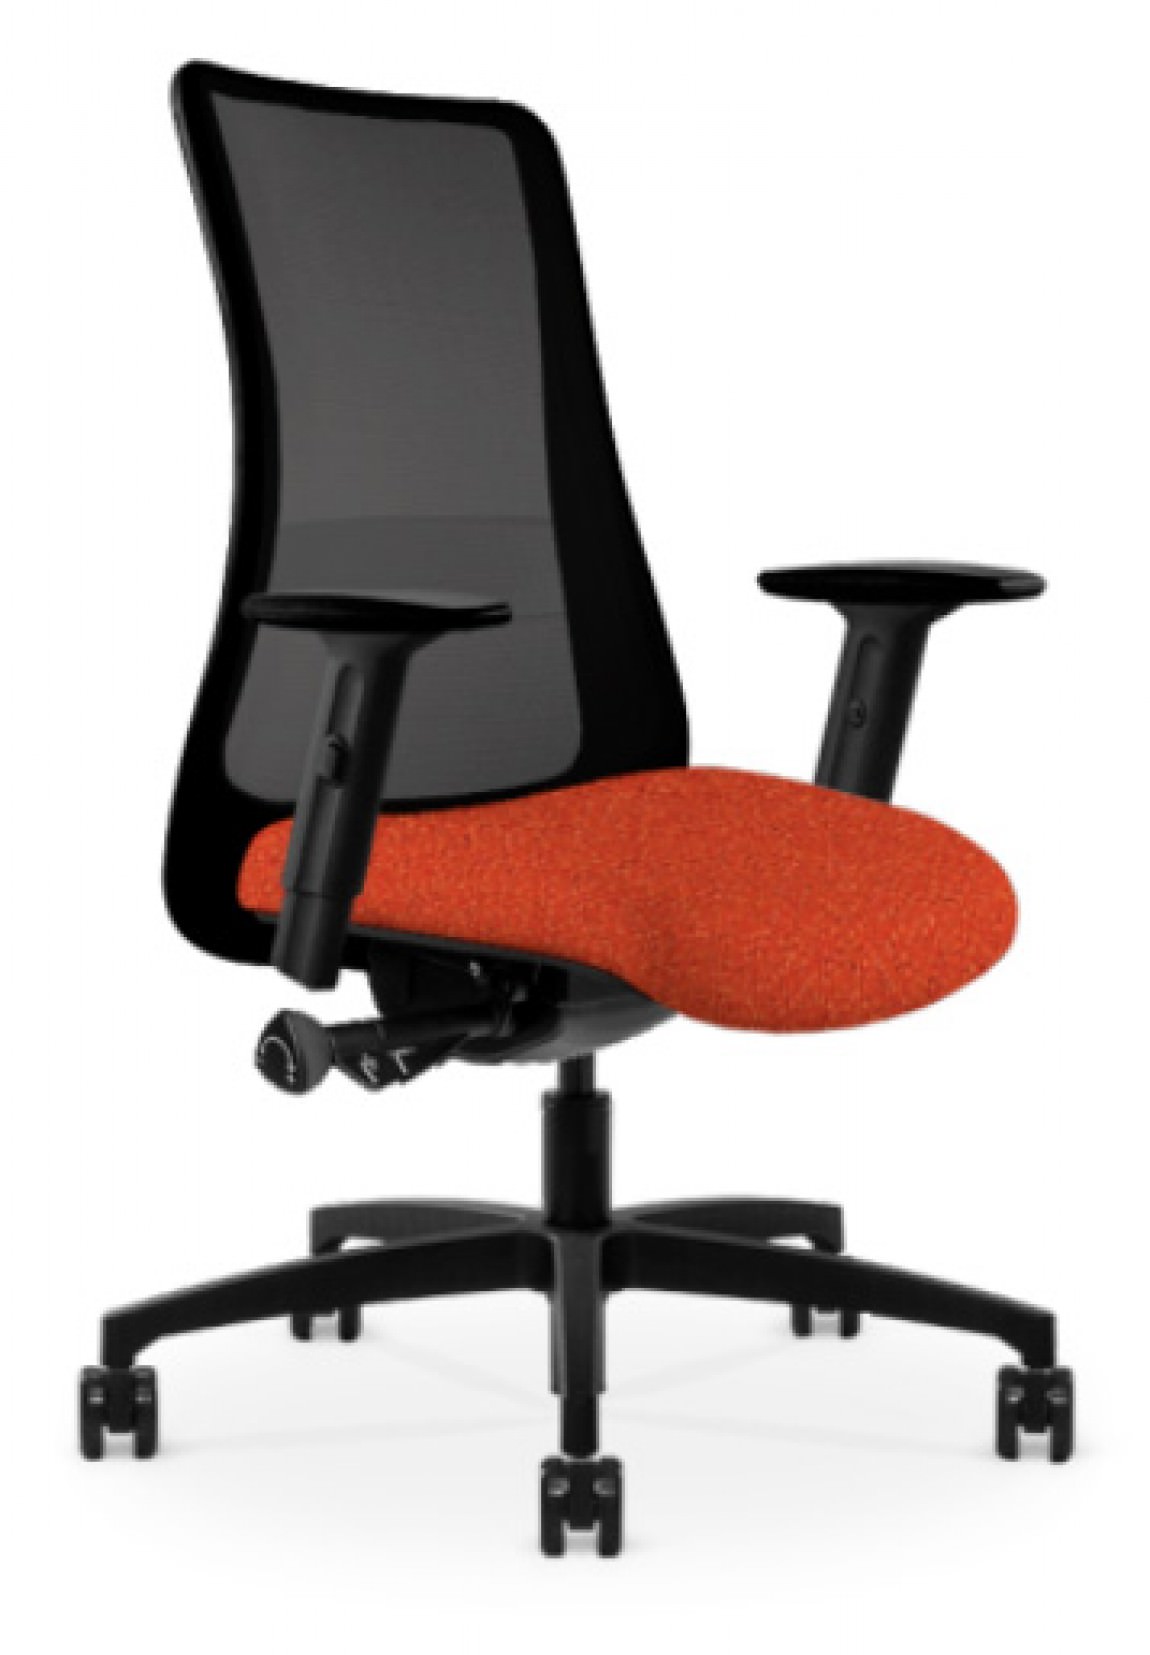 Black Copper Mesh Antimicrobial Office Chair w/ Orange Seat